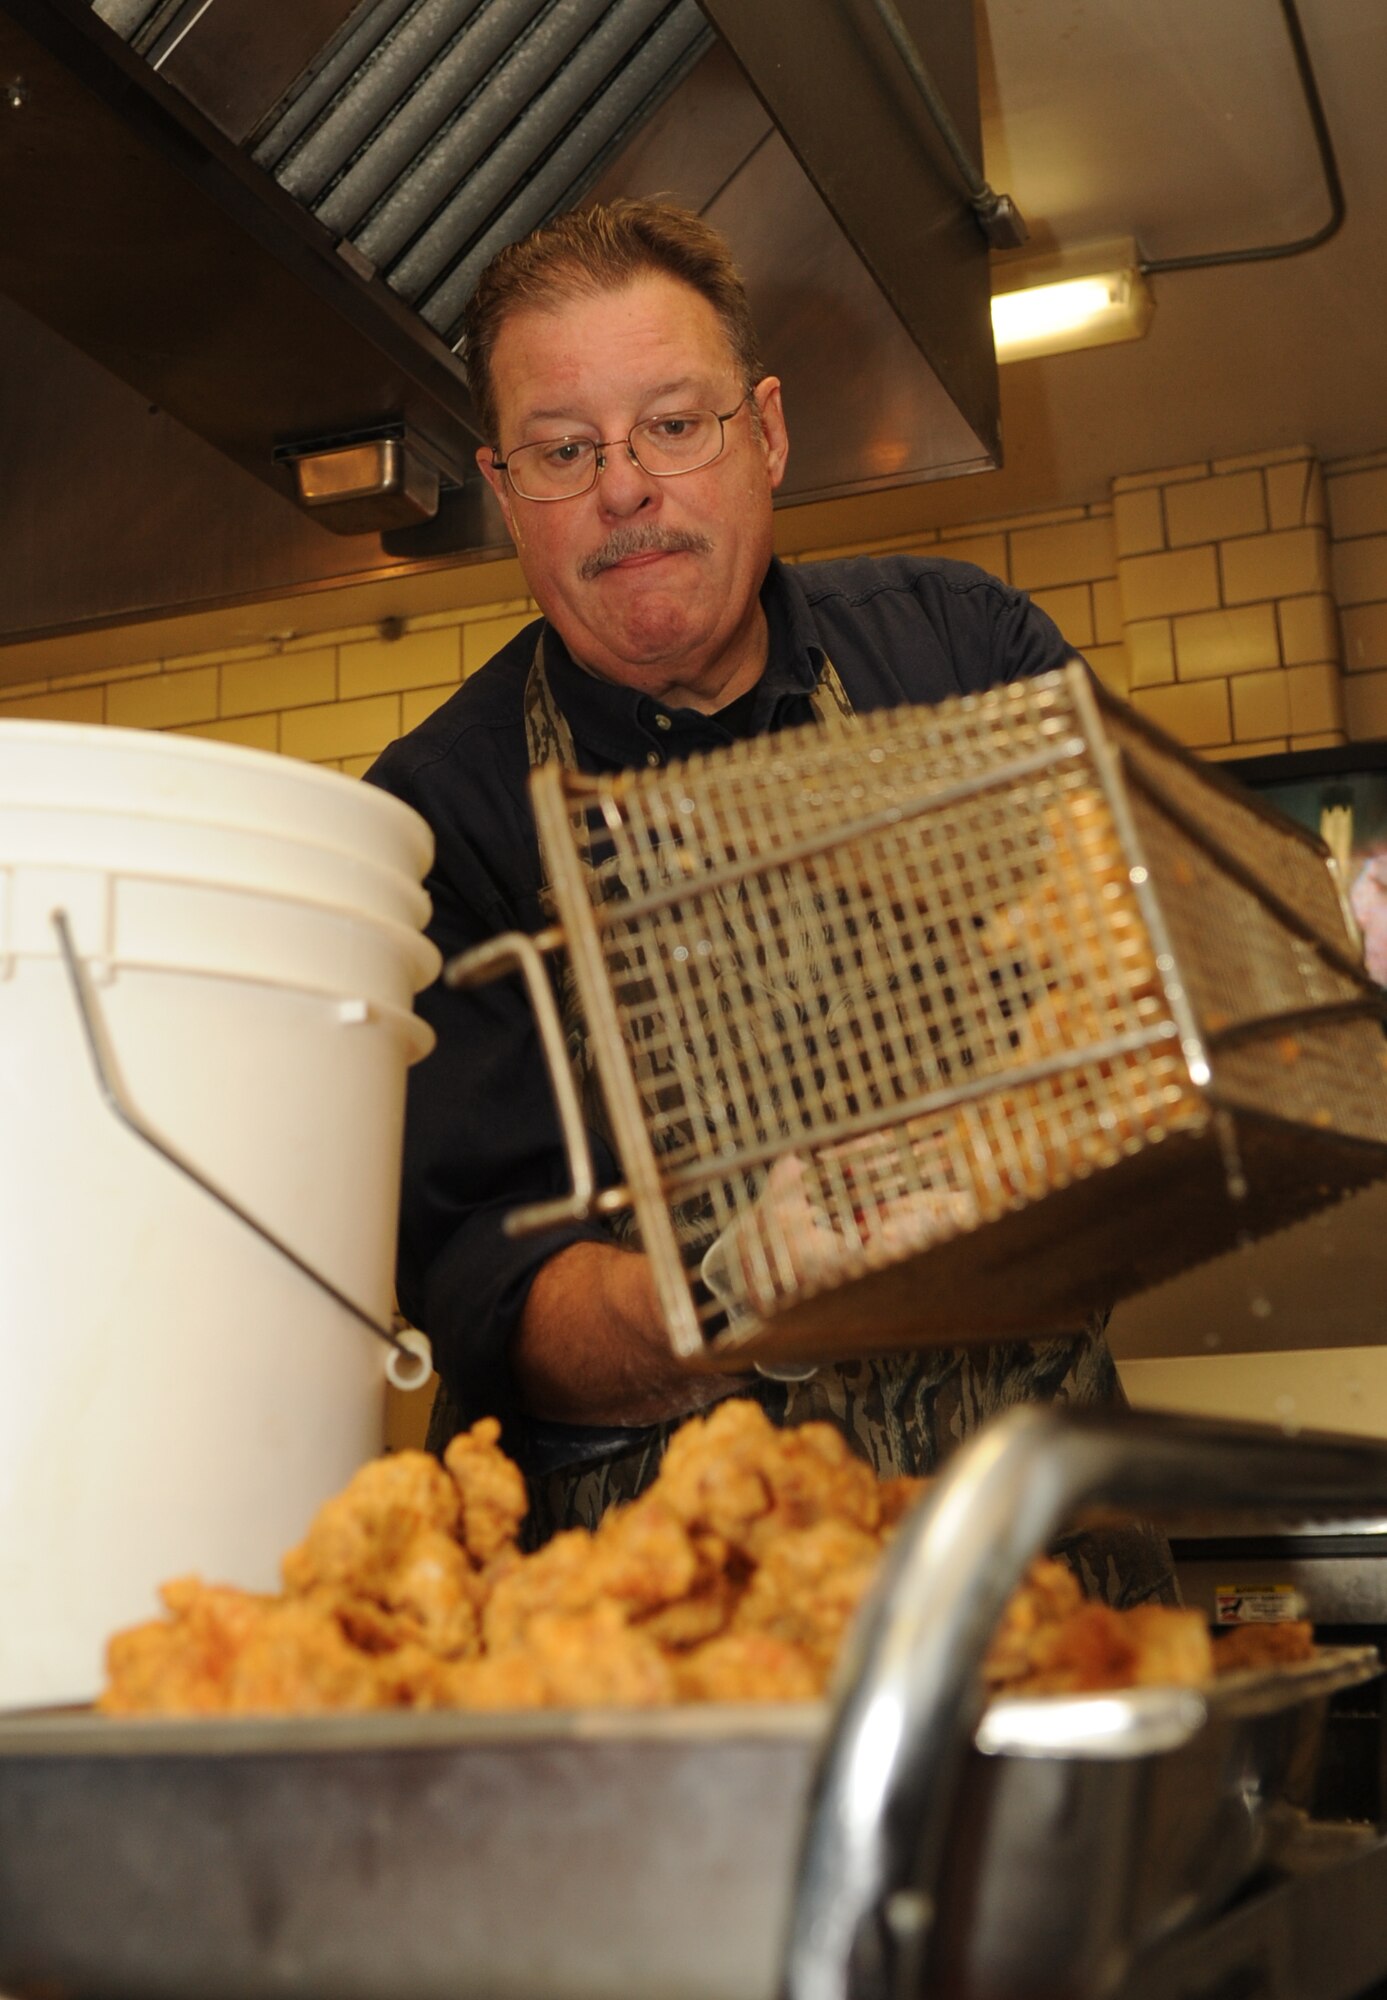 MINOT AIR FORCE BASE, N.D. – John MacMartin, president of the Minot Area Chamber of Commerce, pulls a batch of pheasant strips from the fryer at the 46th Annual Team Minot Sportsmen Feed held at the Jimmy Doolittle Center here Jan. 23. The annual event brings Minot’s Airmen and members of the local community together for food, fun and camaraderie. (U.S. Air Force photo/Tech. Sgt. Thomas Dow)